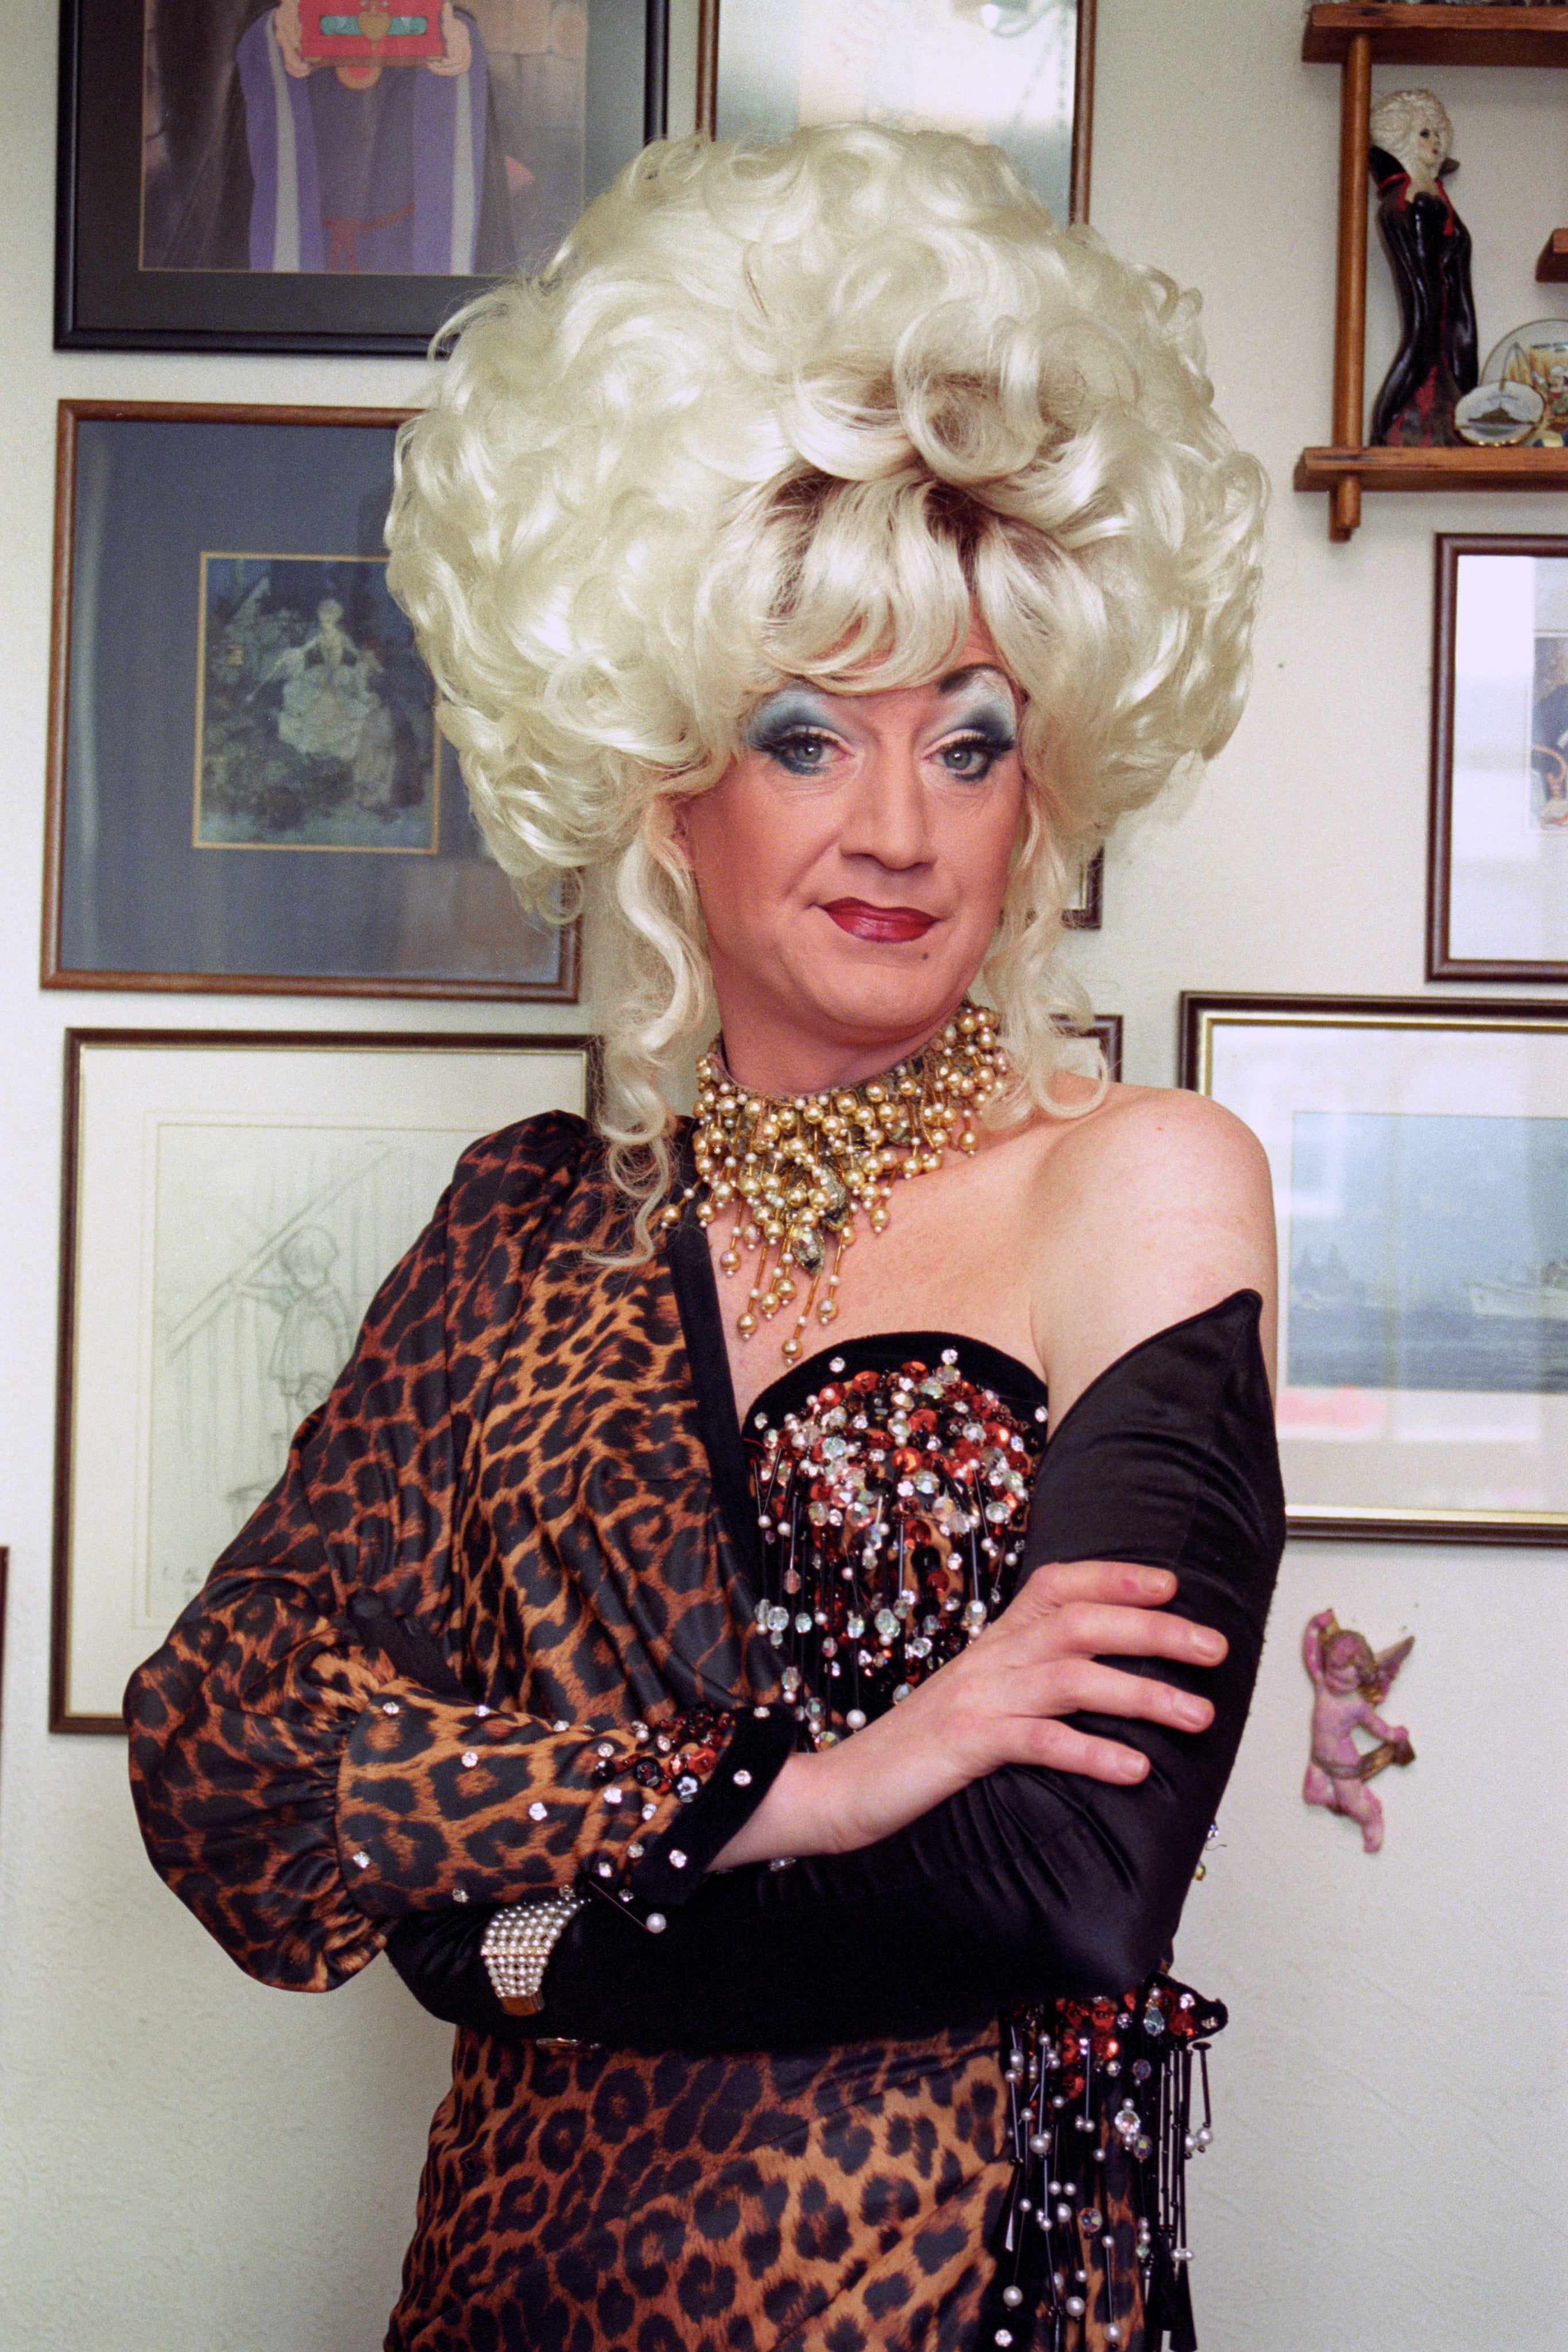 Alter ego: O’Grady in character as Lily Savage, complete with trademark blonde wig